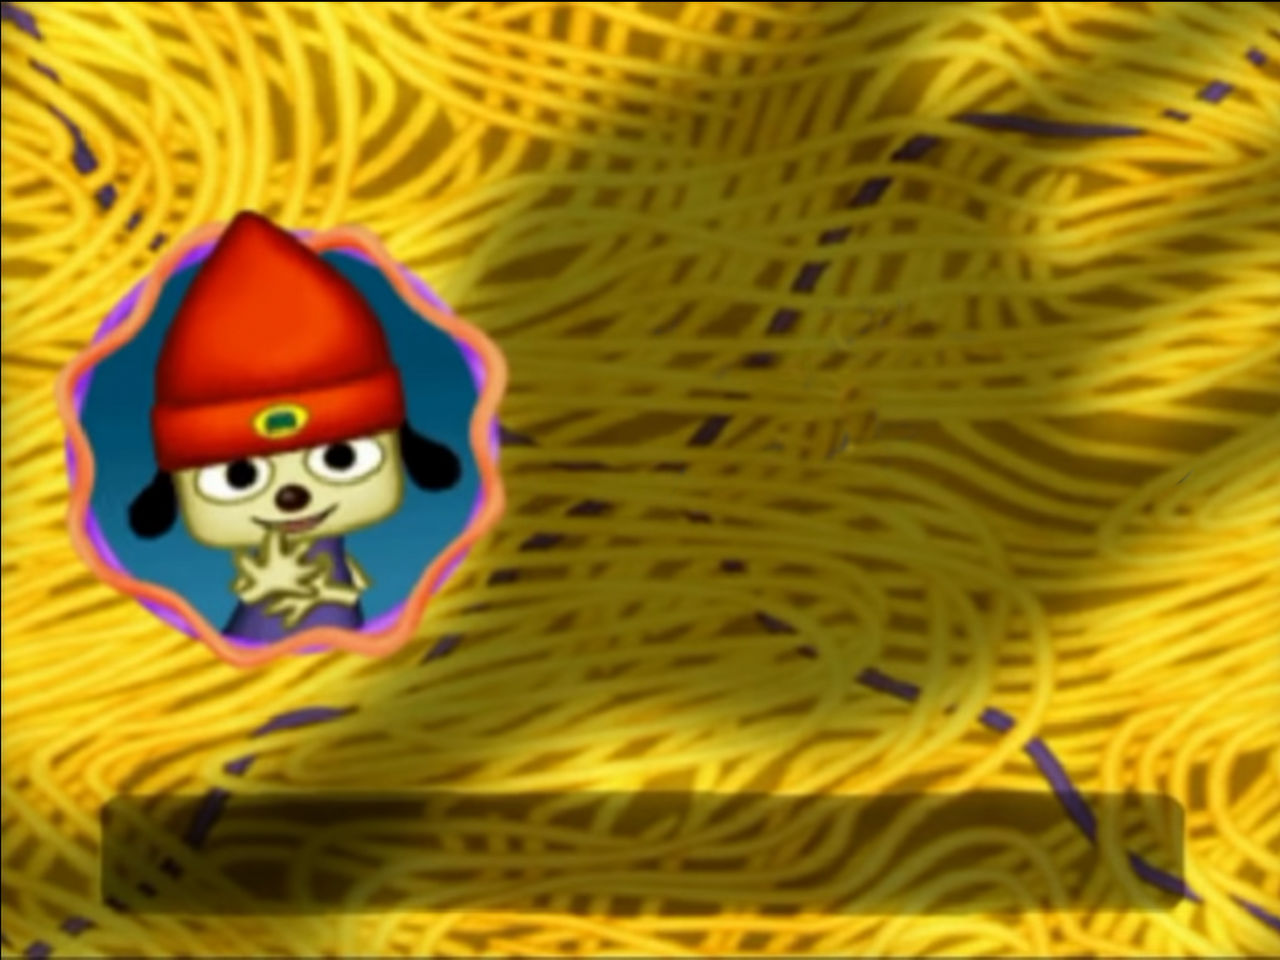 I now have every trophy in PaRappa the Rapper 2 : r/Parappa